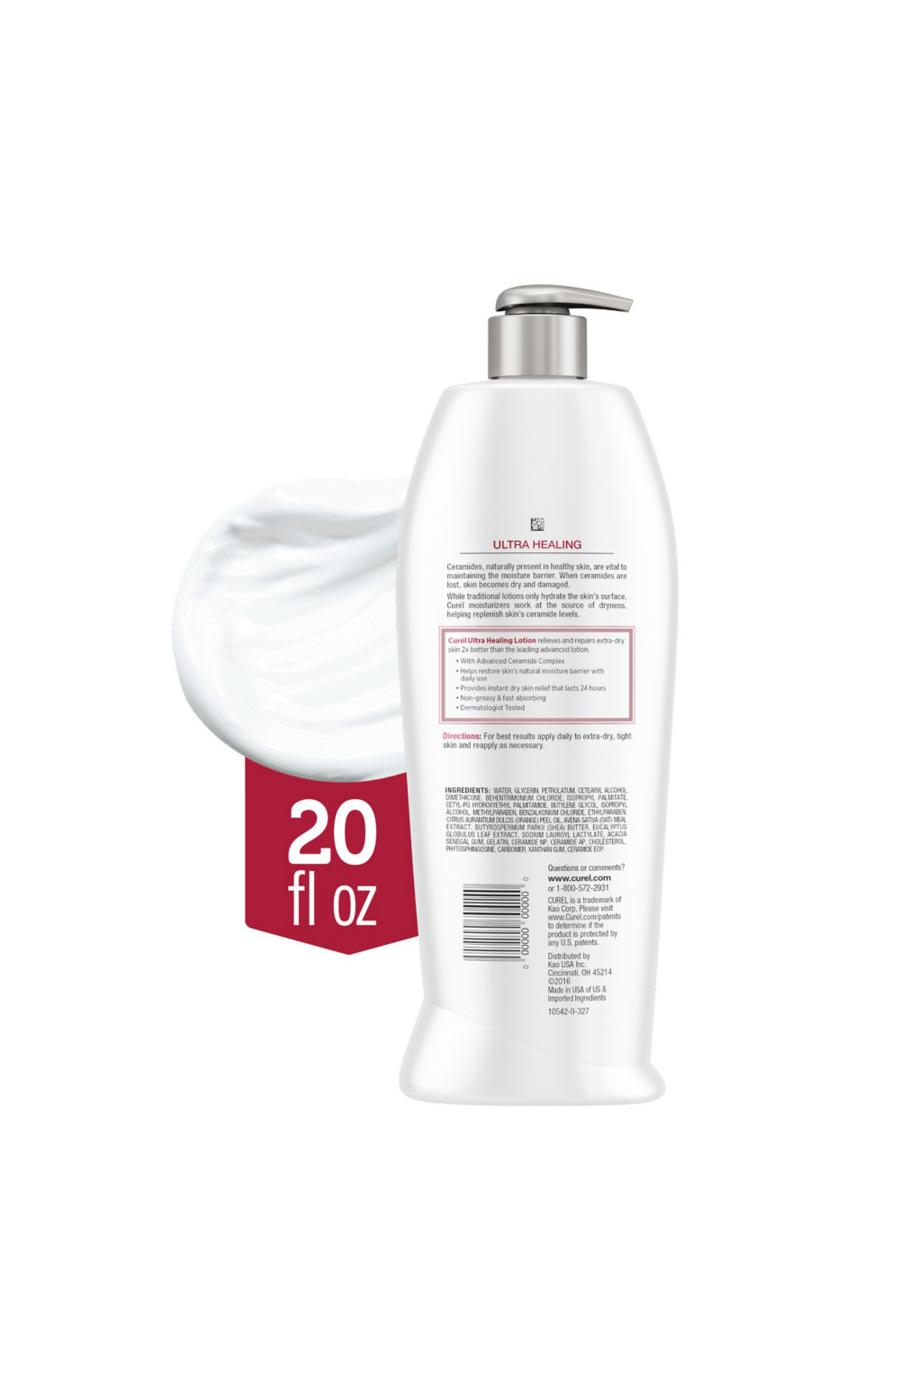 Curel Ultra Healing Lotion; image 3 of 16